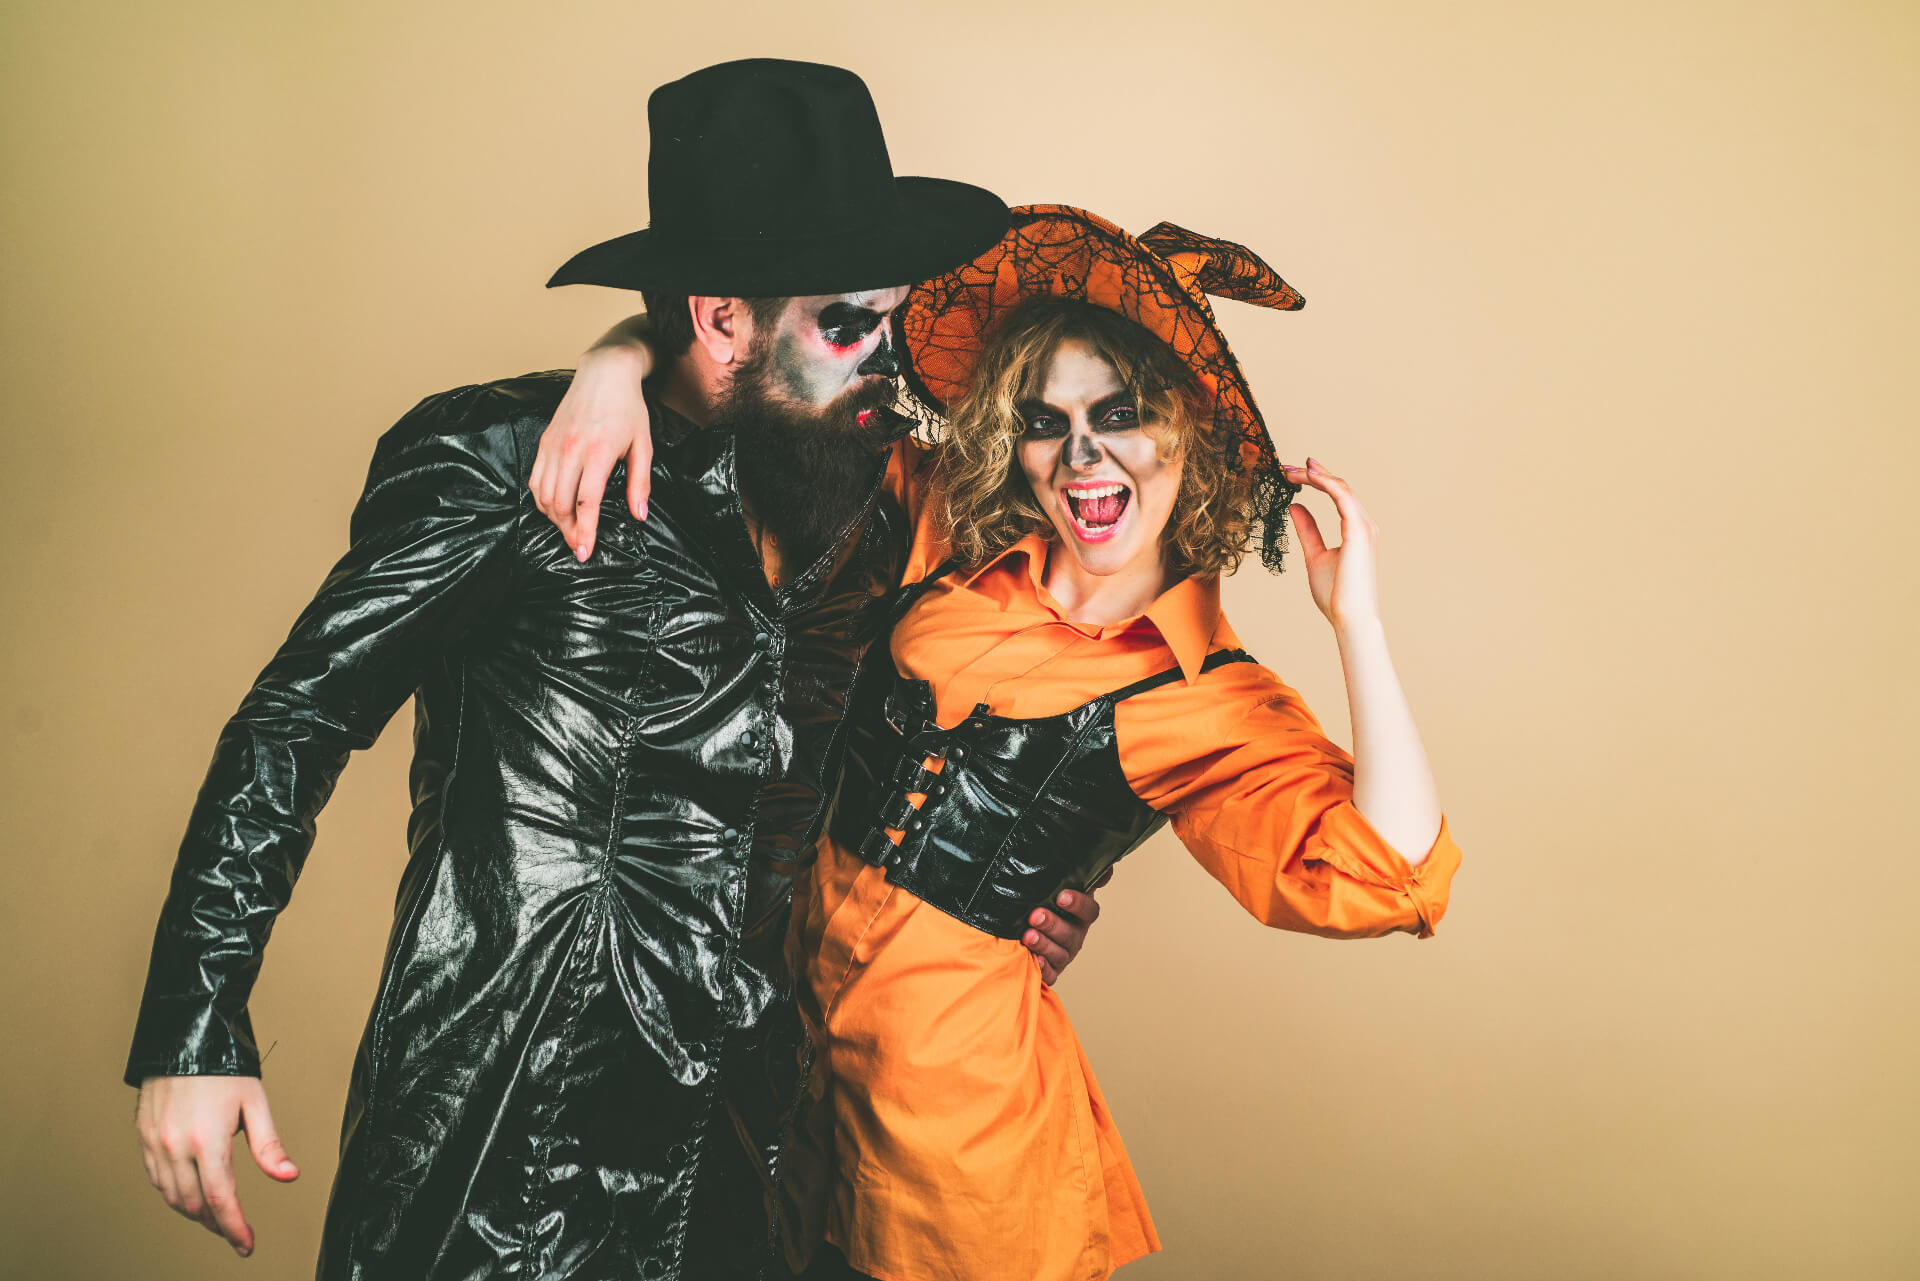 Show your creativity on Halloween by transforming into witches and zombies. Discover the fascinating world of eerie costumes.